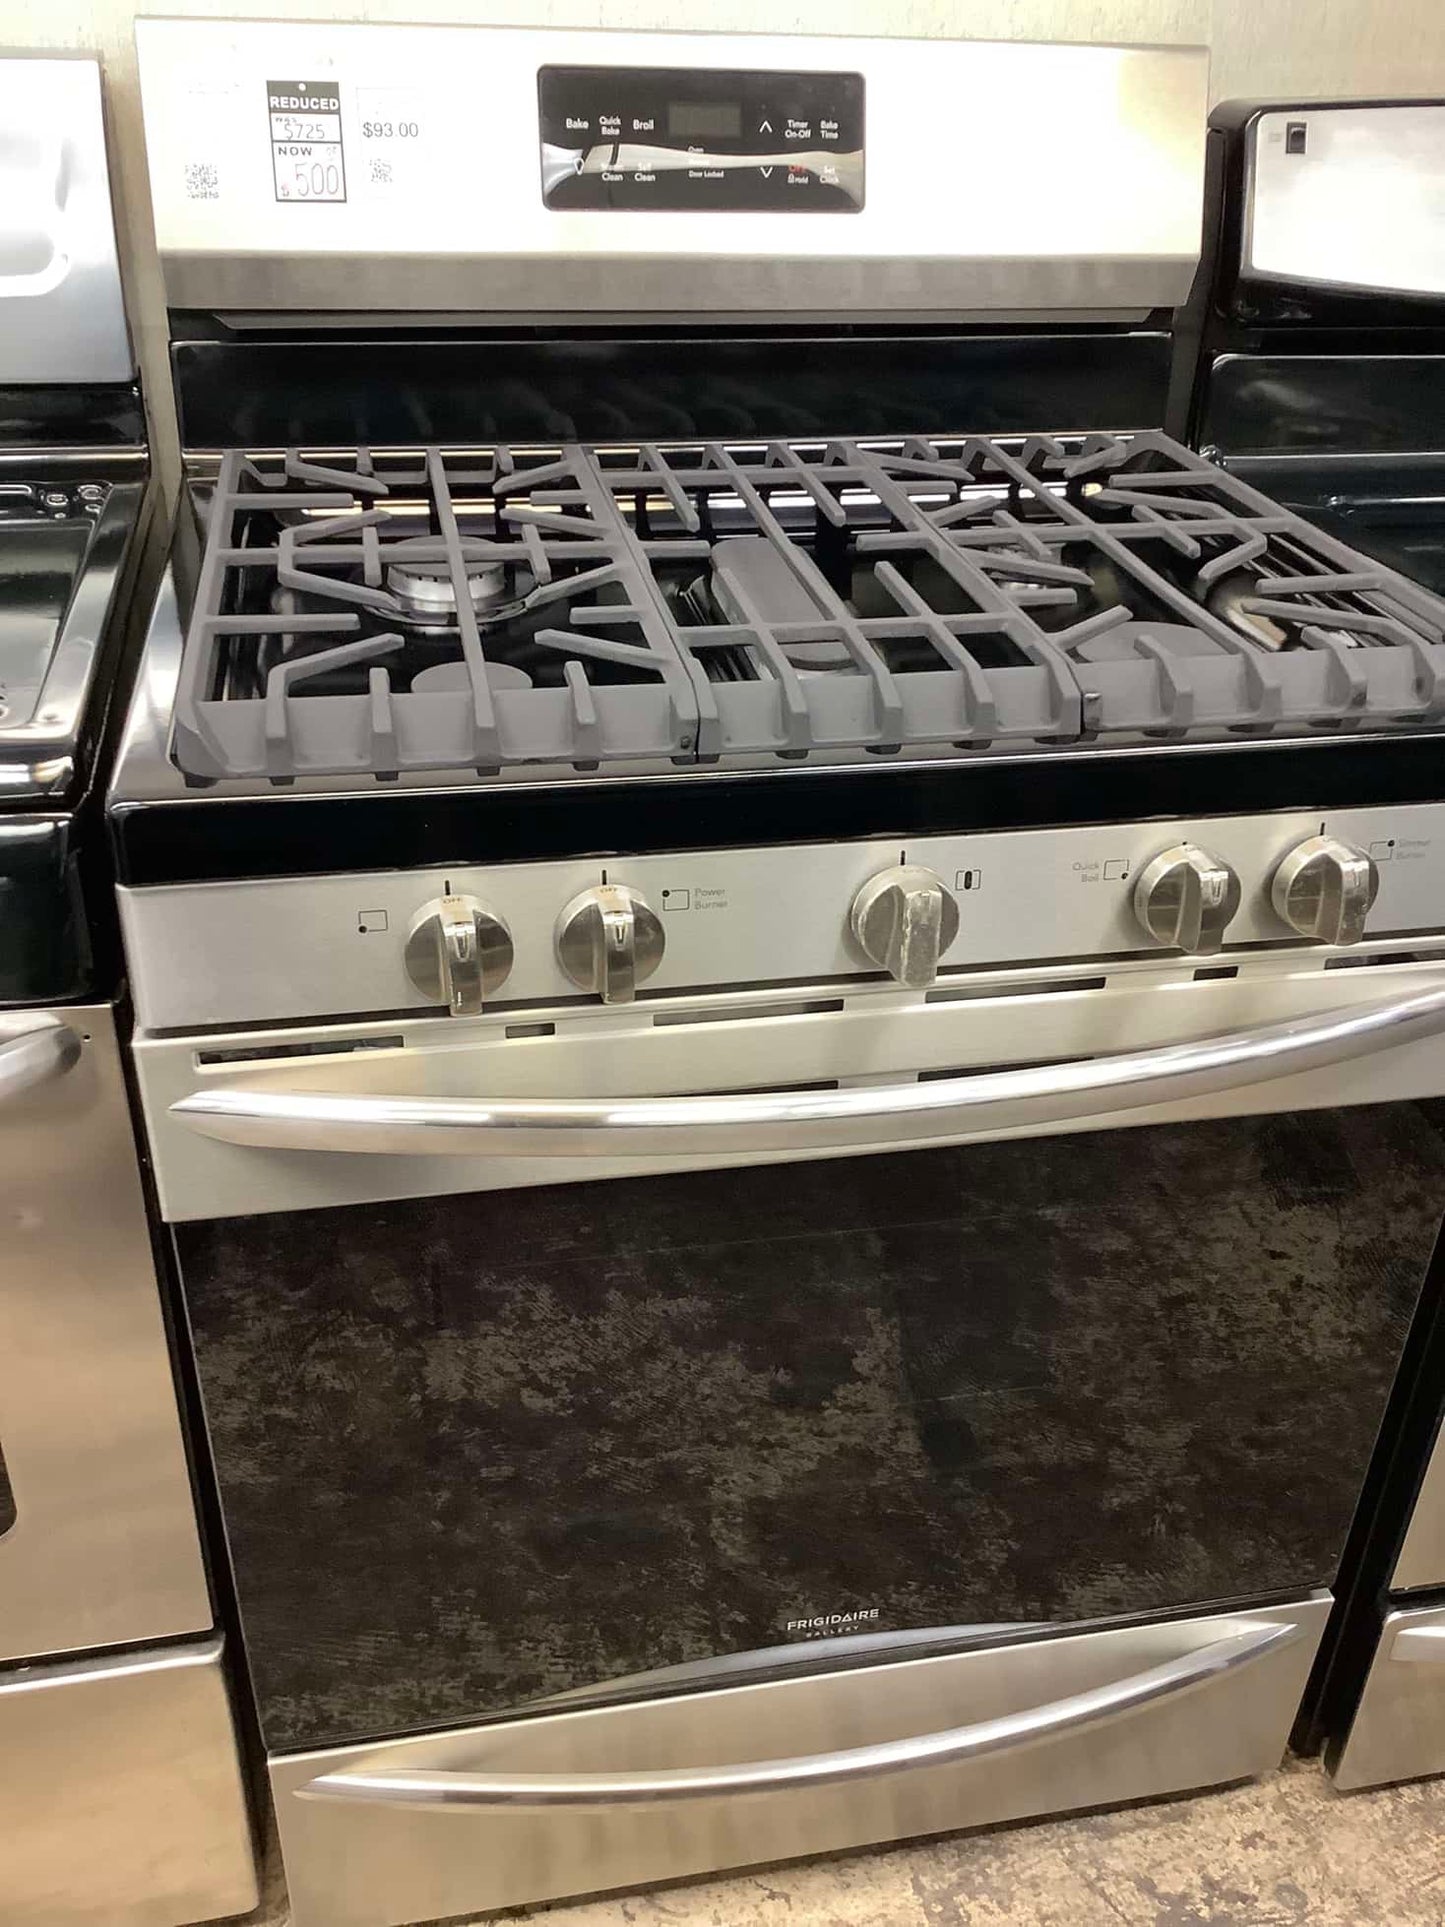 “Frigidaire gas range double oven stainless steel 5 burner bake broil convection 30 in